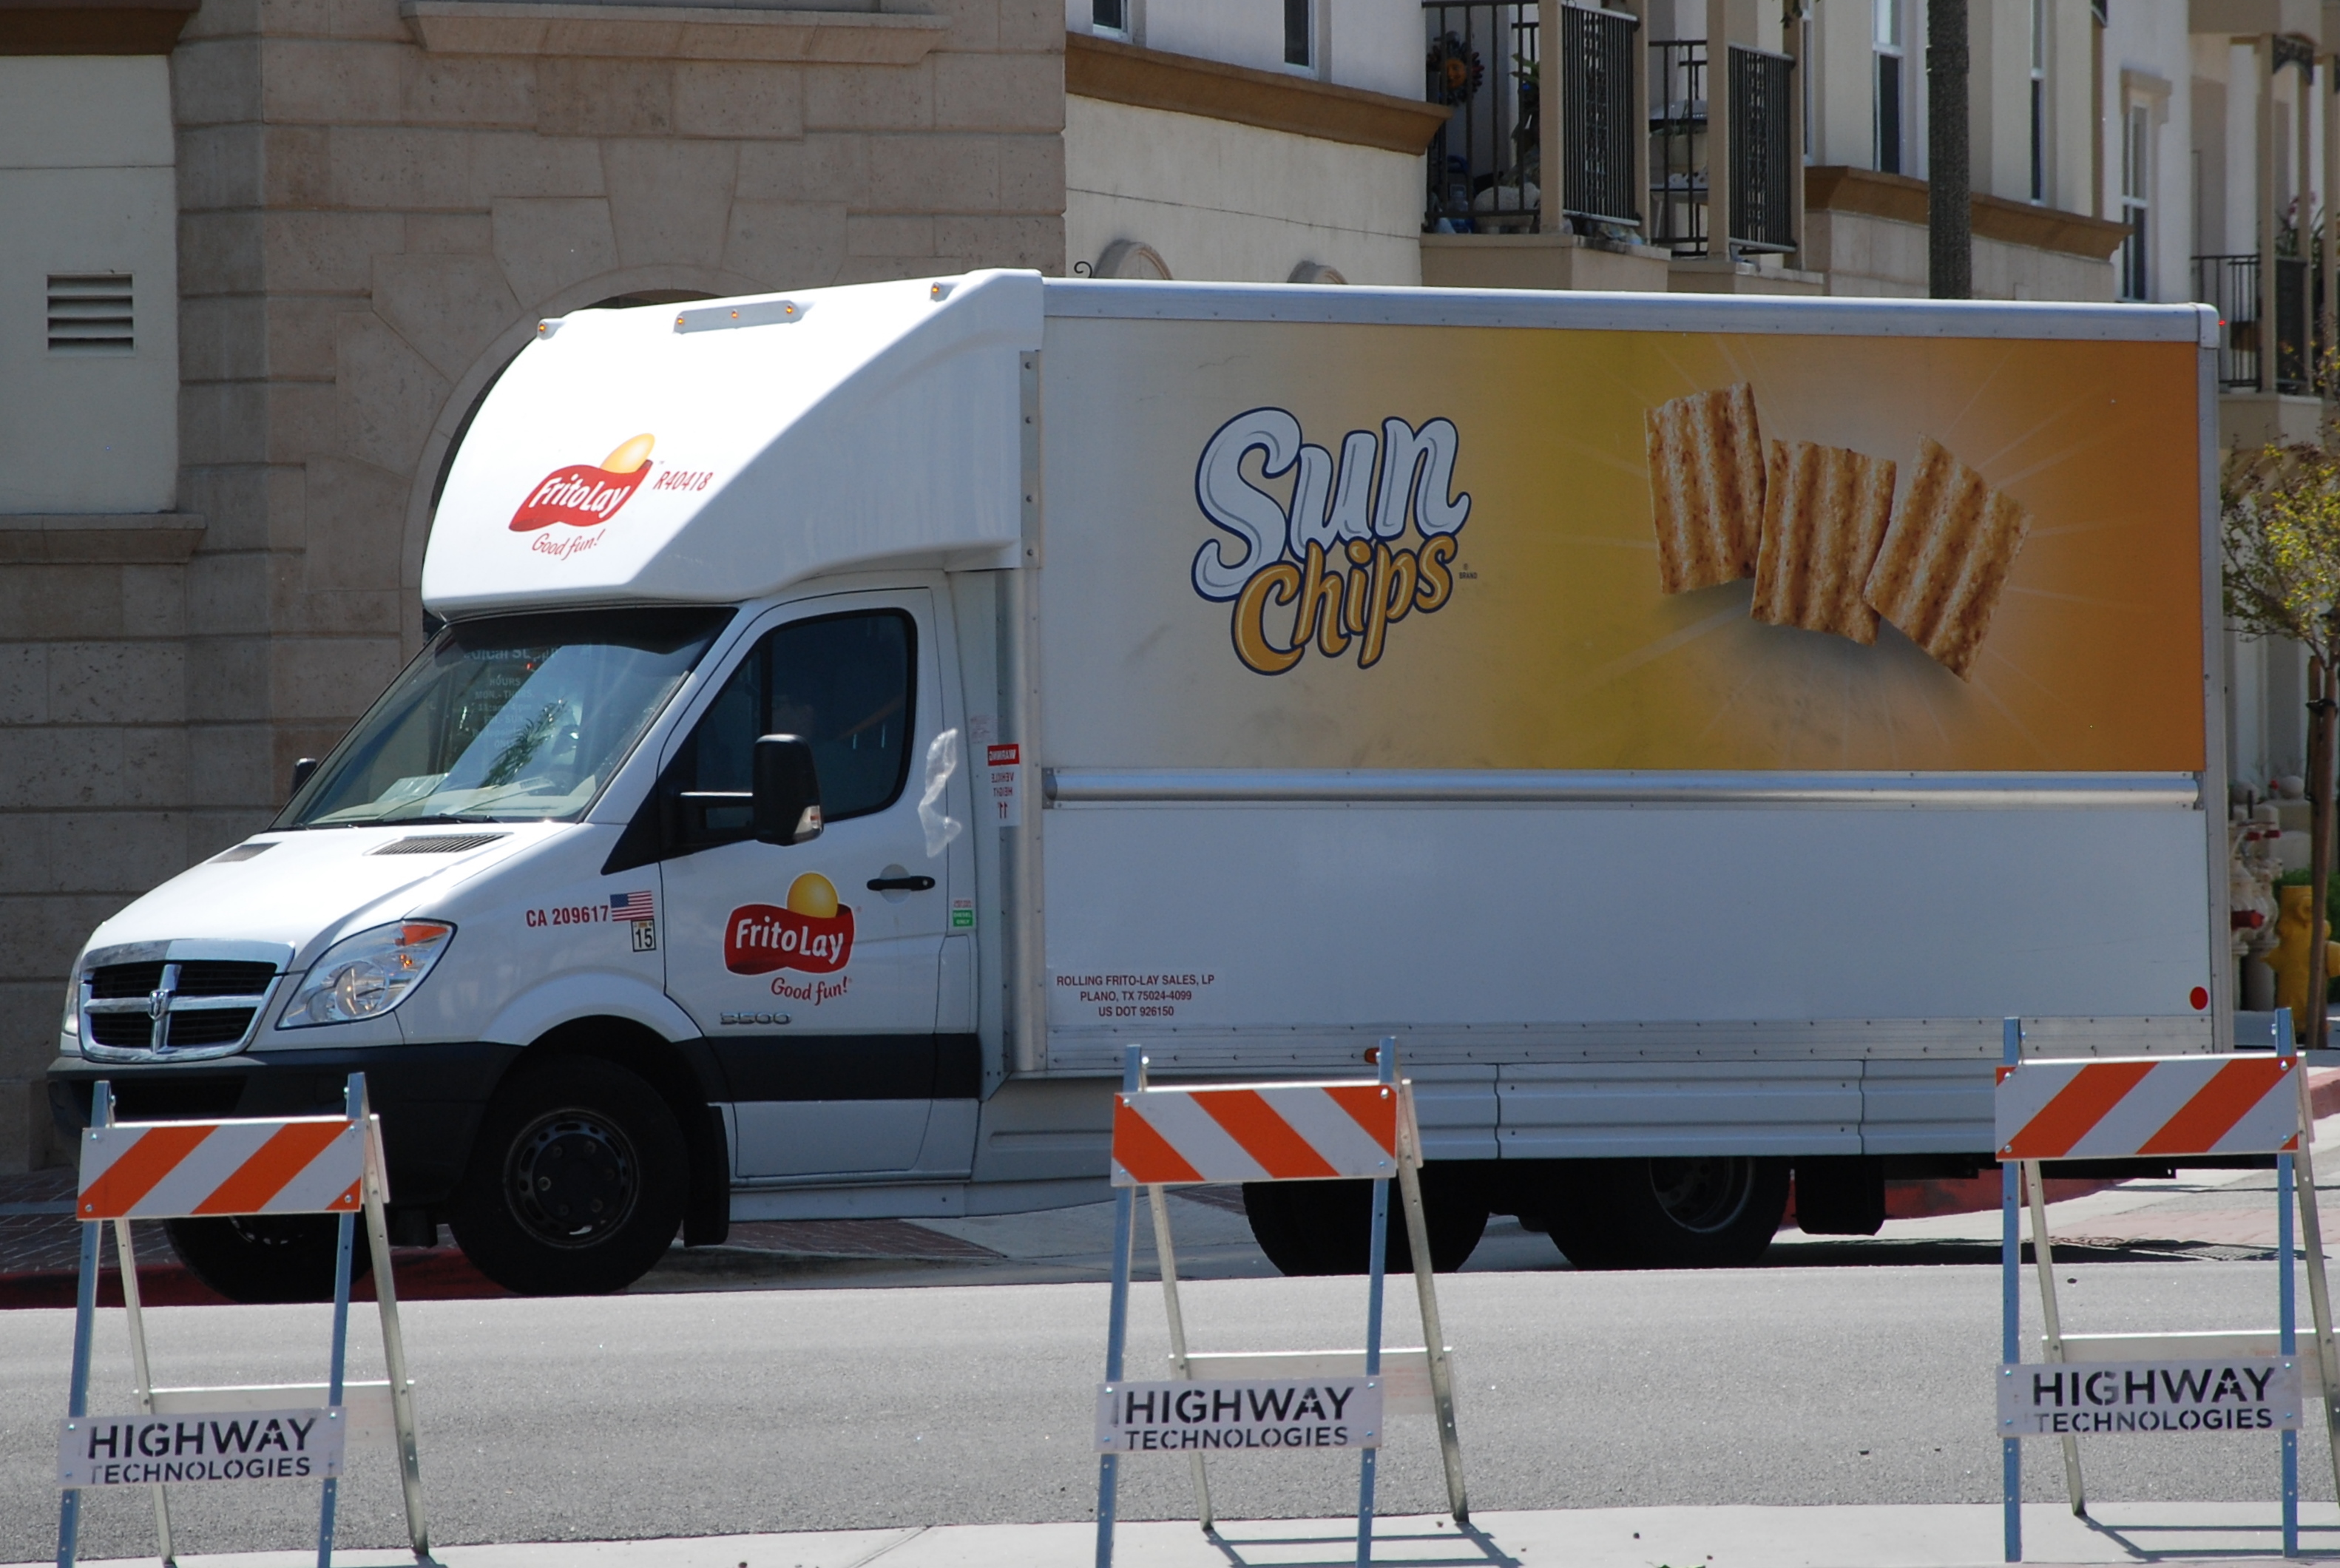 FRITO LAY - DODGE SPRINTER DELIVERY TRUCK | Flickr - Photo Sharing!